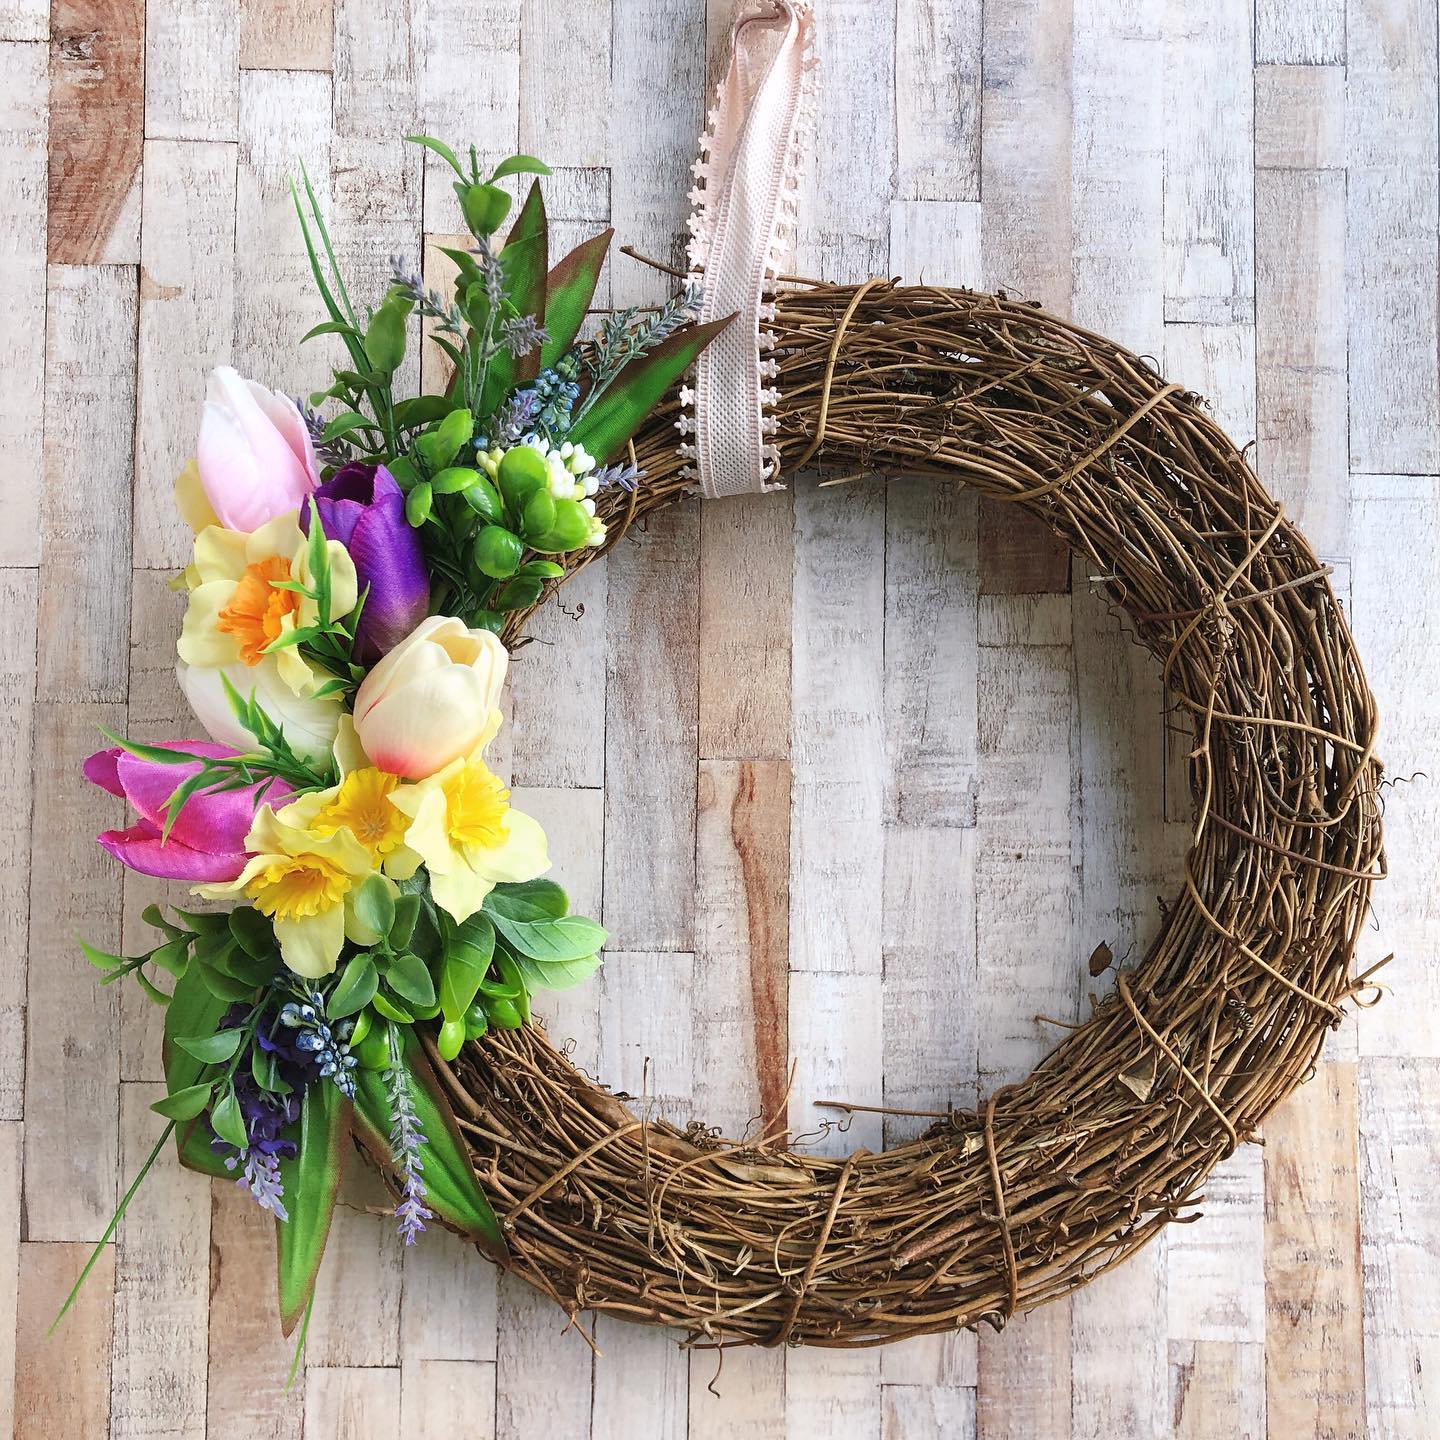 Get ready for Spring with a Spring Wreath for your home